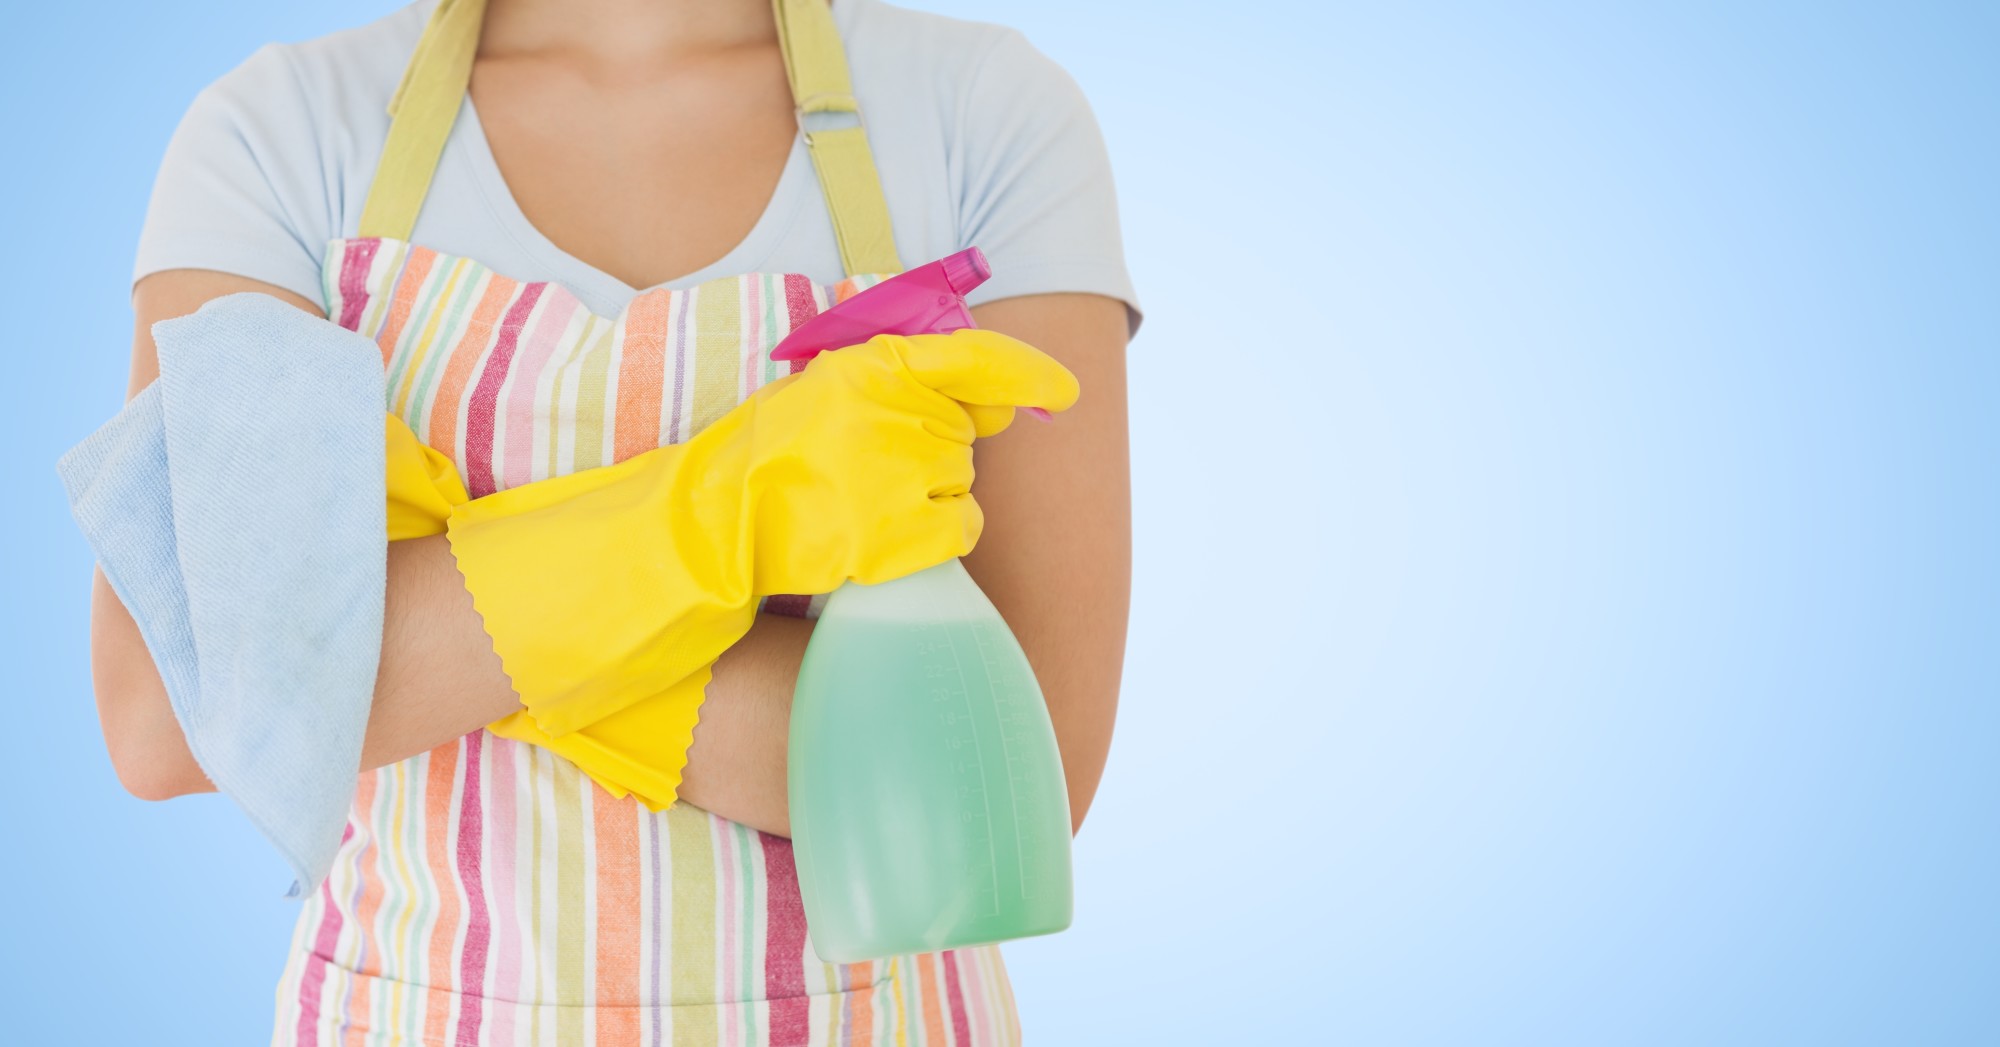 Deep Cleaning vs Regular House Cleaning: What You're Actually Missing